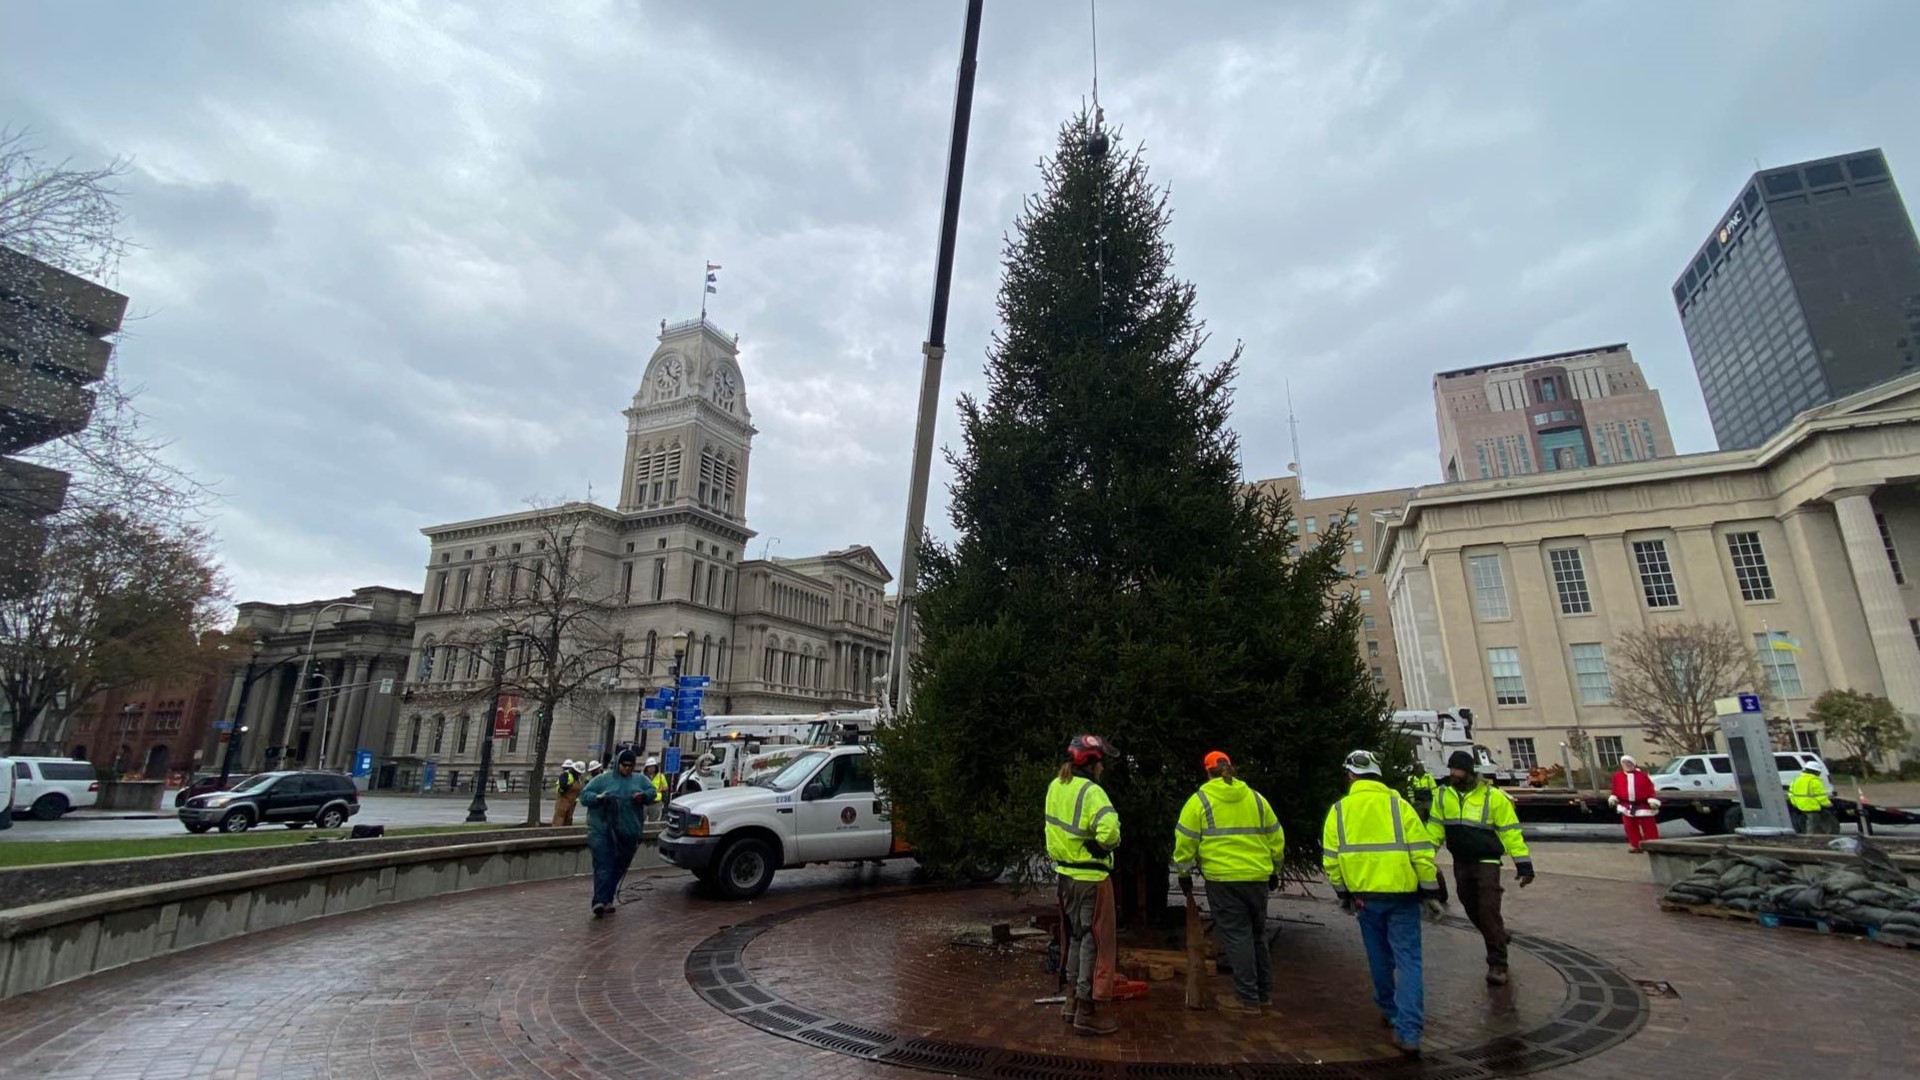 The 35-foot-tall Norway Spruce was donated by a Louisville family in the Parkway Village neighborhood.